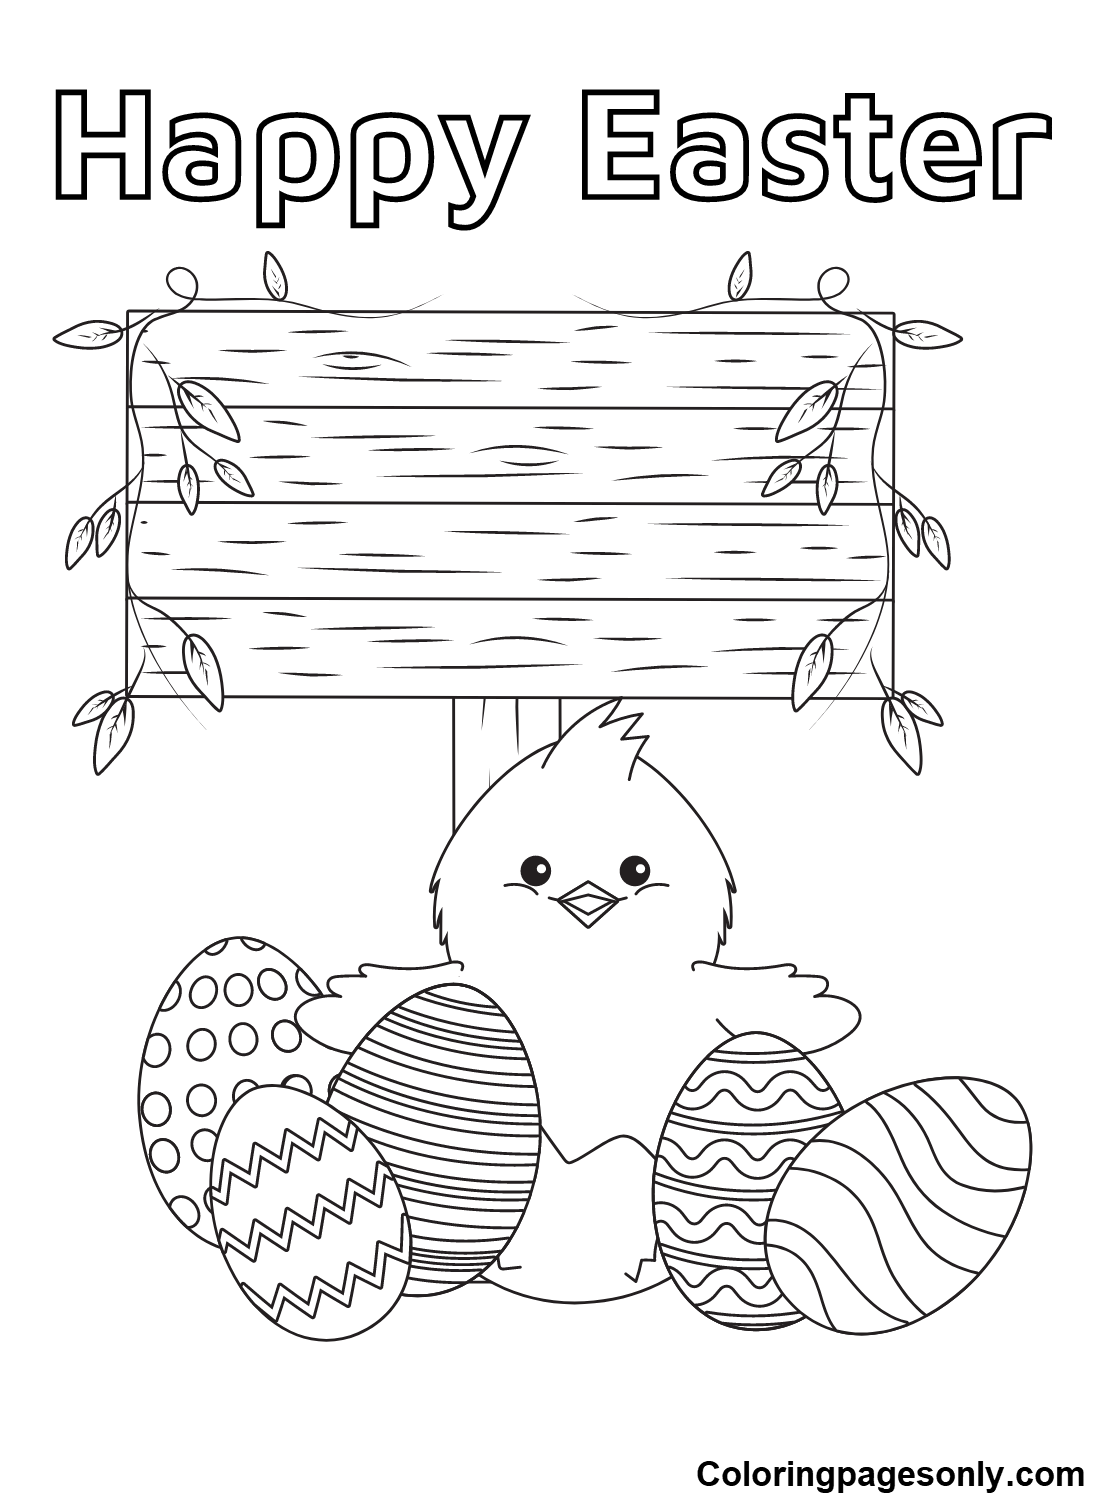 Happy Easter With Chick Coloring Pages